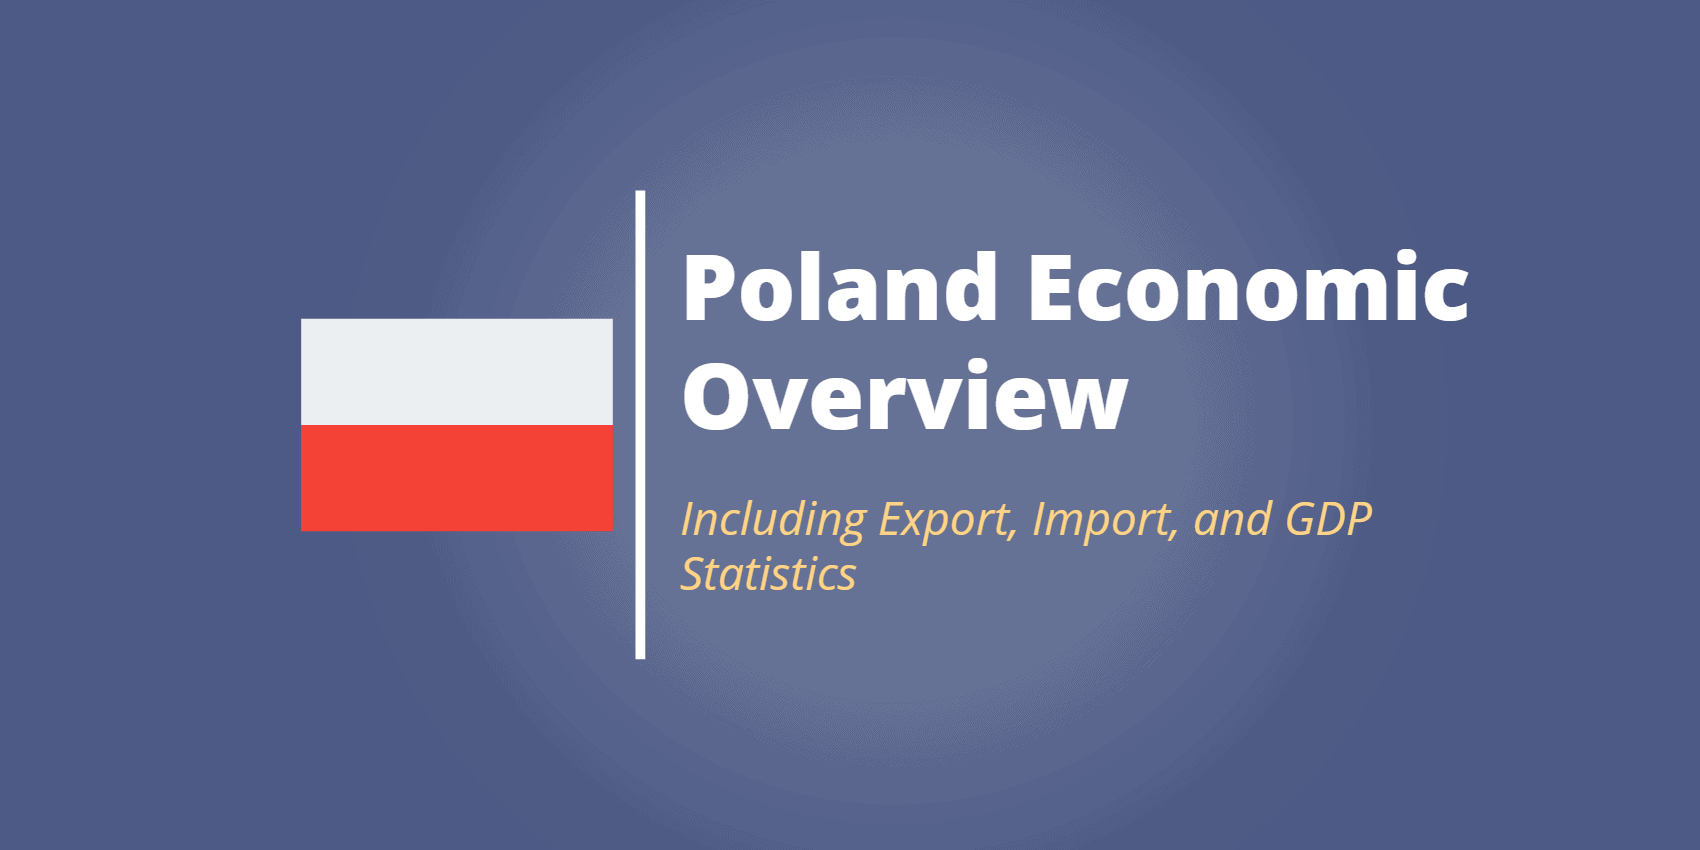 Poland's Top Commodity Imports & Exports - Commodity.com